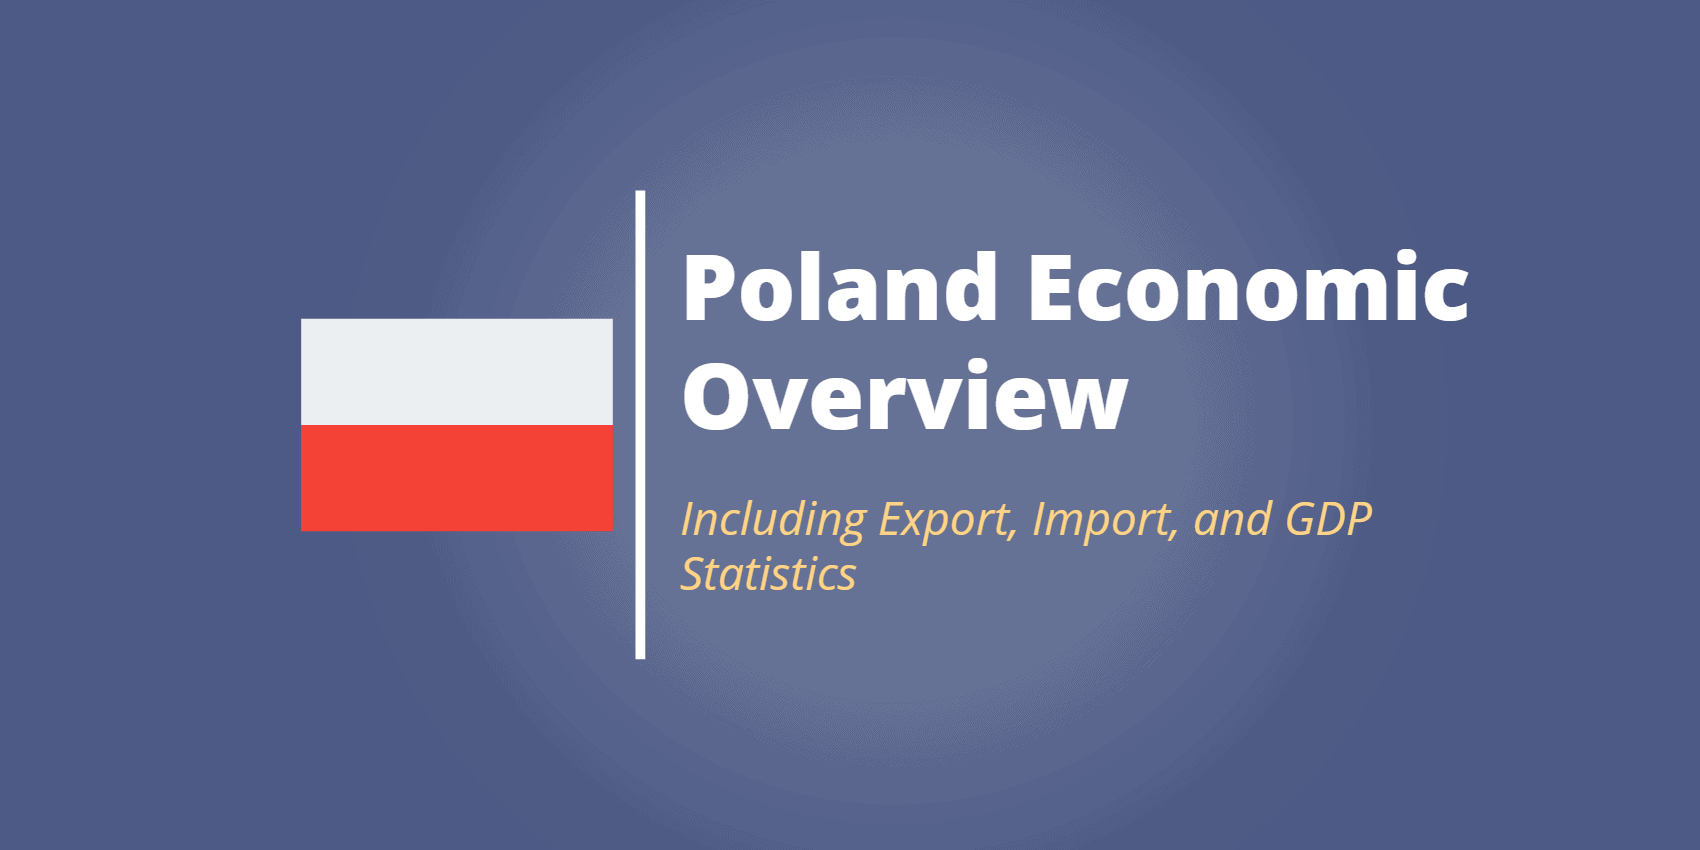 Poland's Top Commodity Imports & Exports - Commodity.com